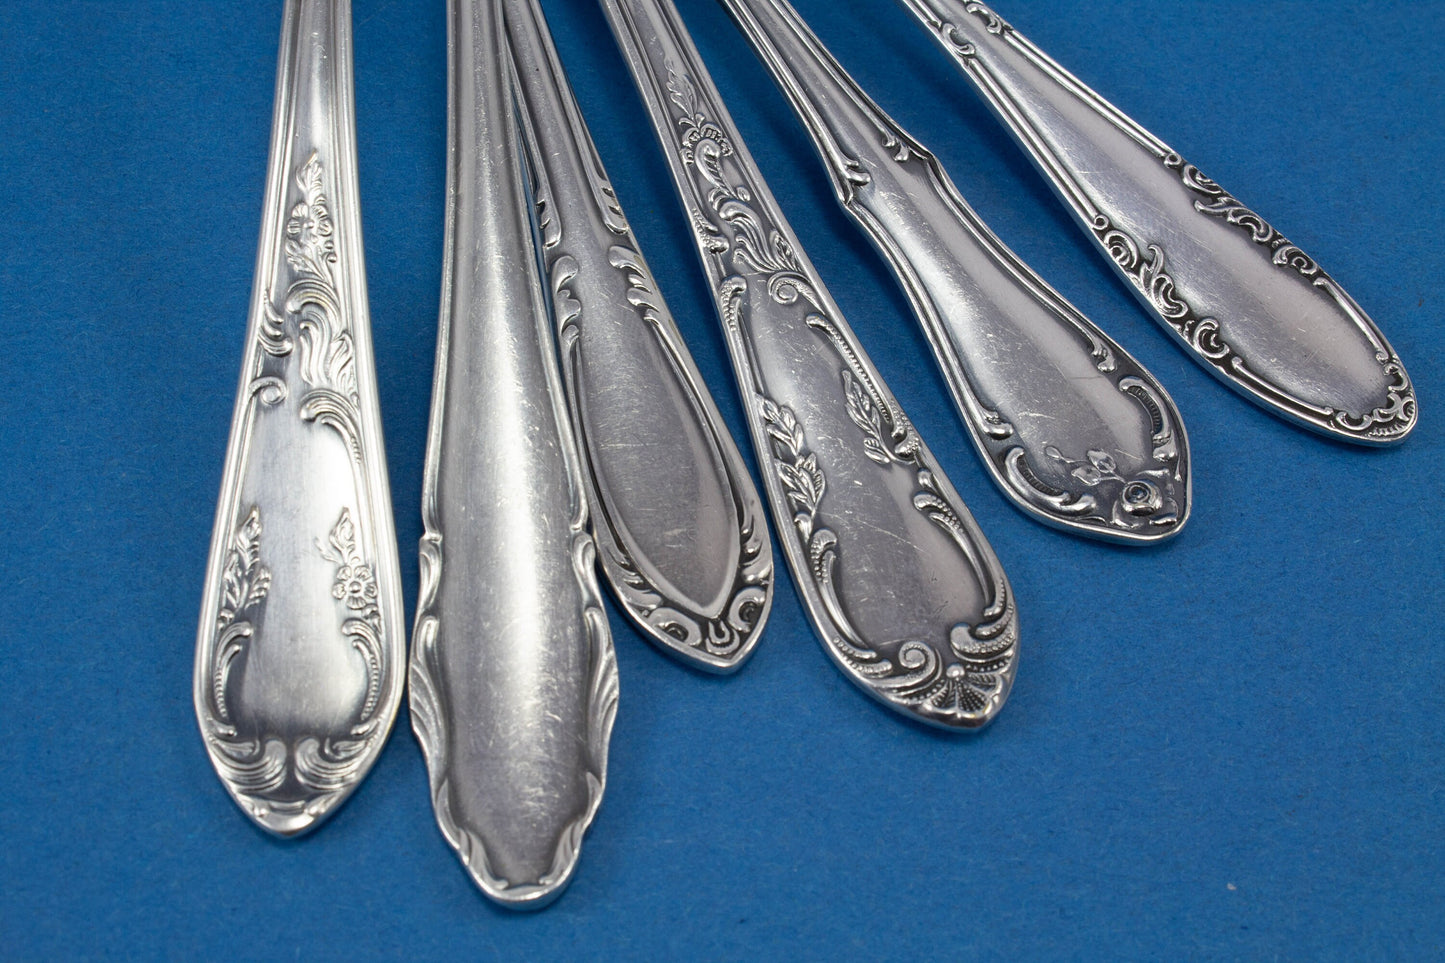 6 silver plated cake forks with mismatched patterns, shabby chic 